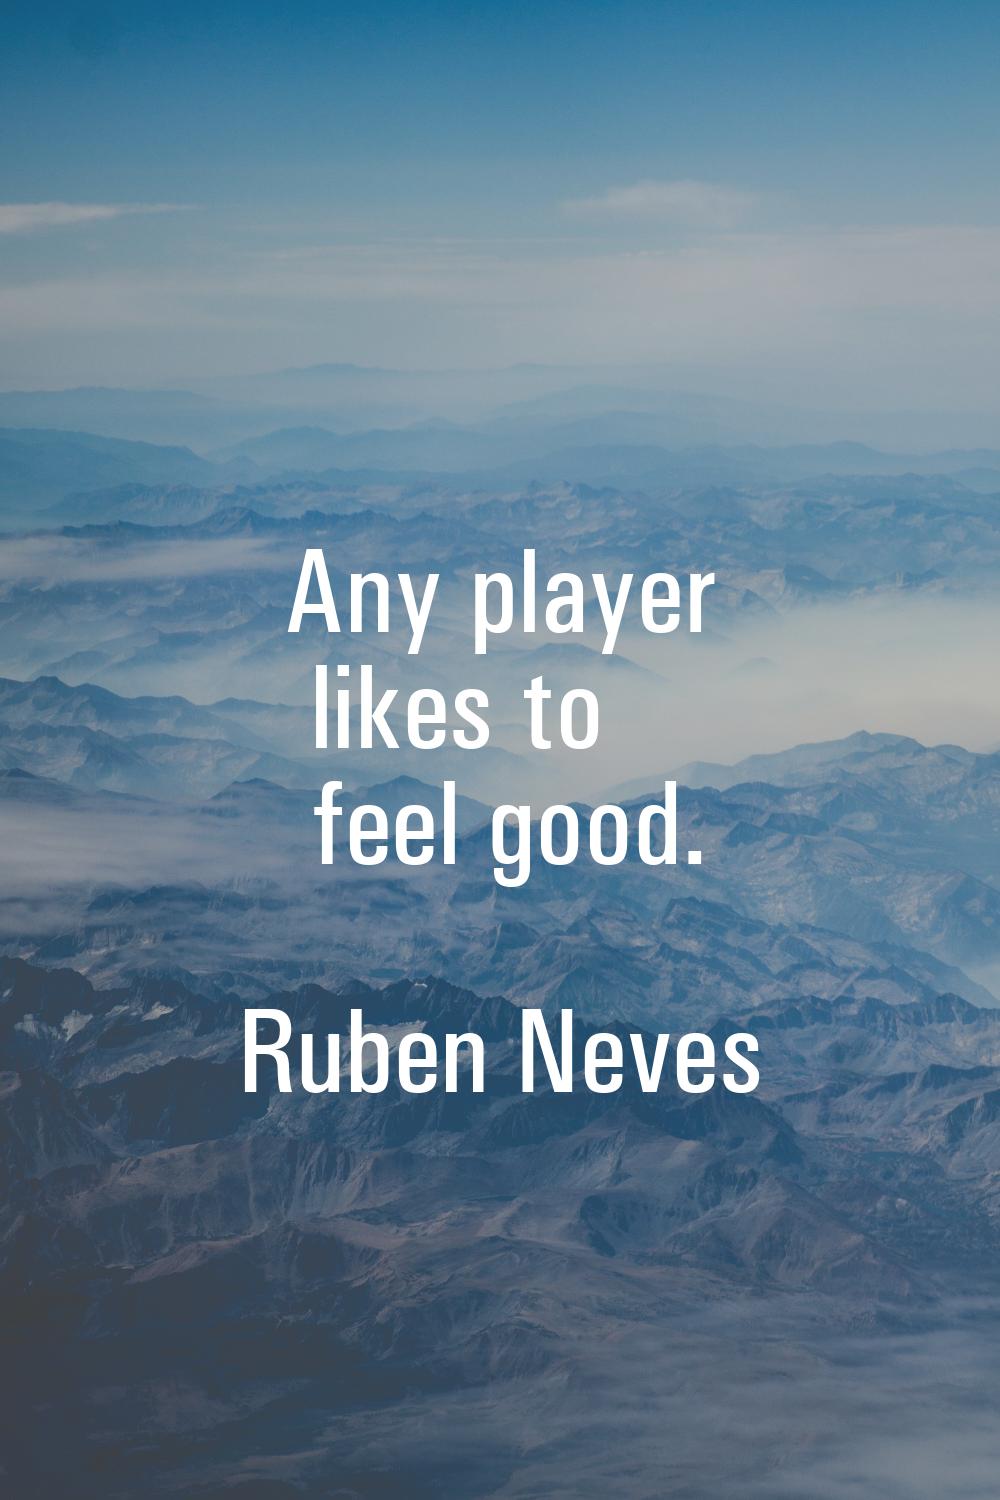 Any player likes to feel good.